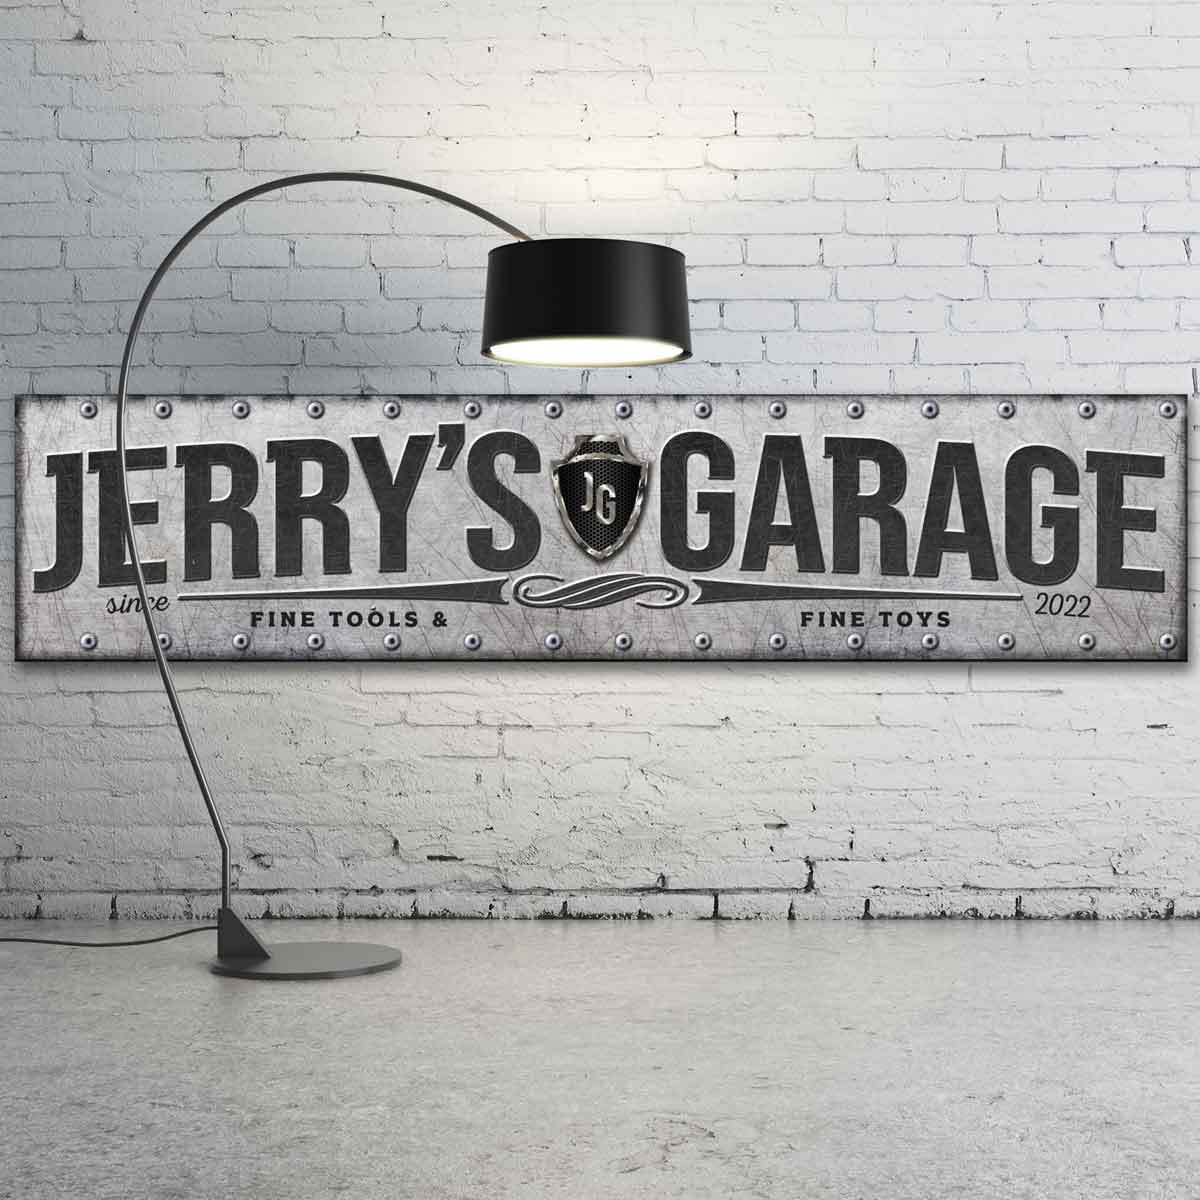 Industrial personalized garage sign. Large metal garage sign with personalized name and metal stamping around outer edge. Font is all caps and dark gray/ black. 